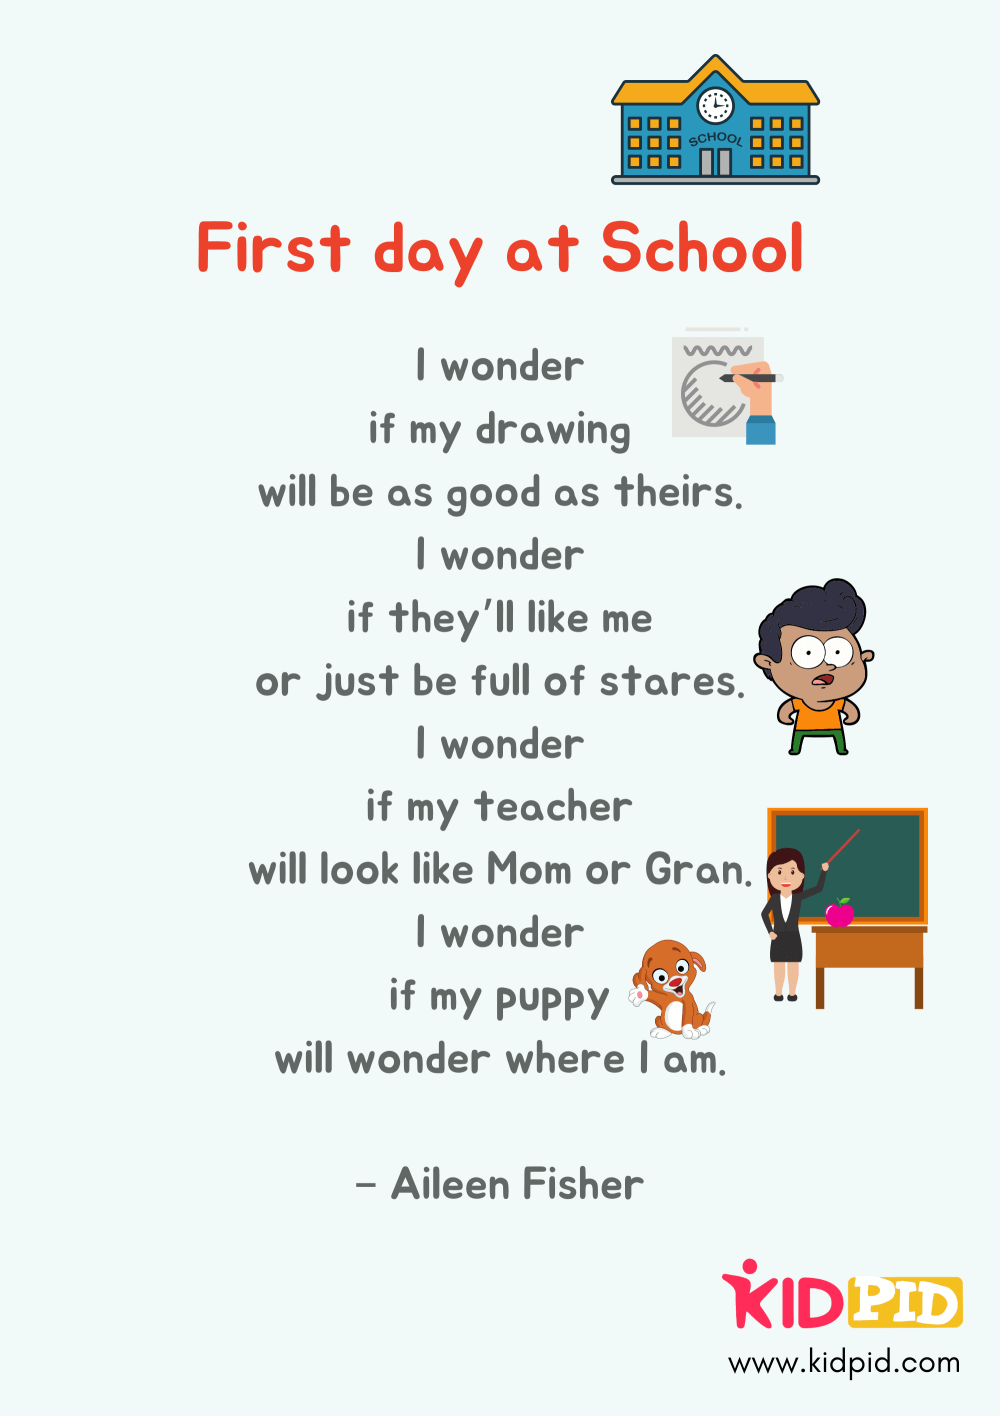 First day at School - Class 2 Poem - Kidpid